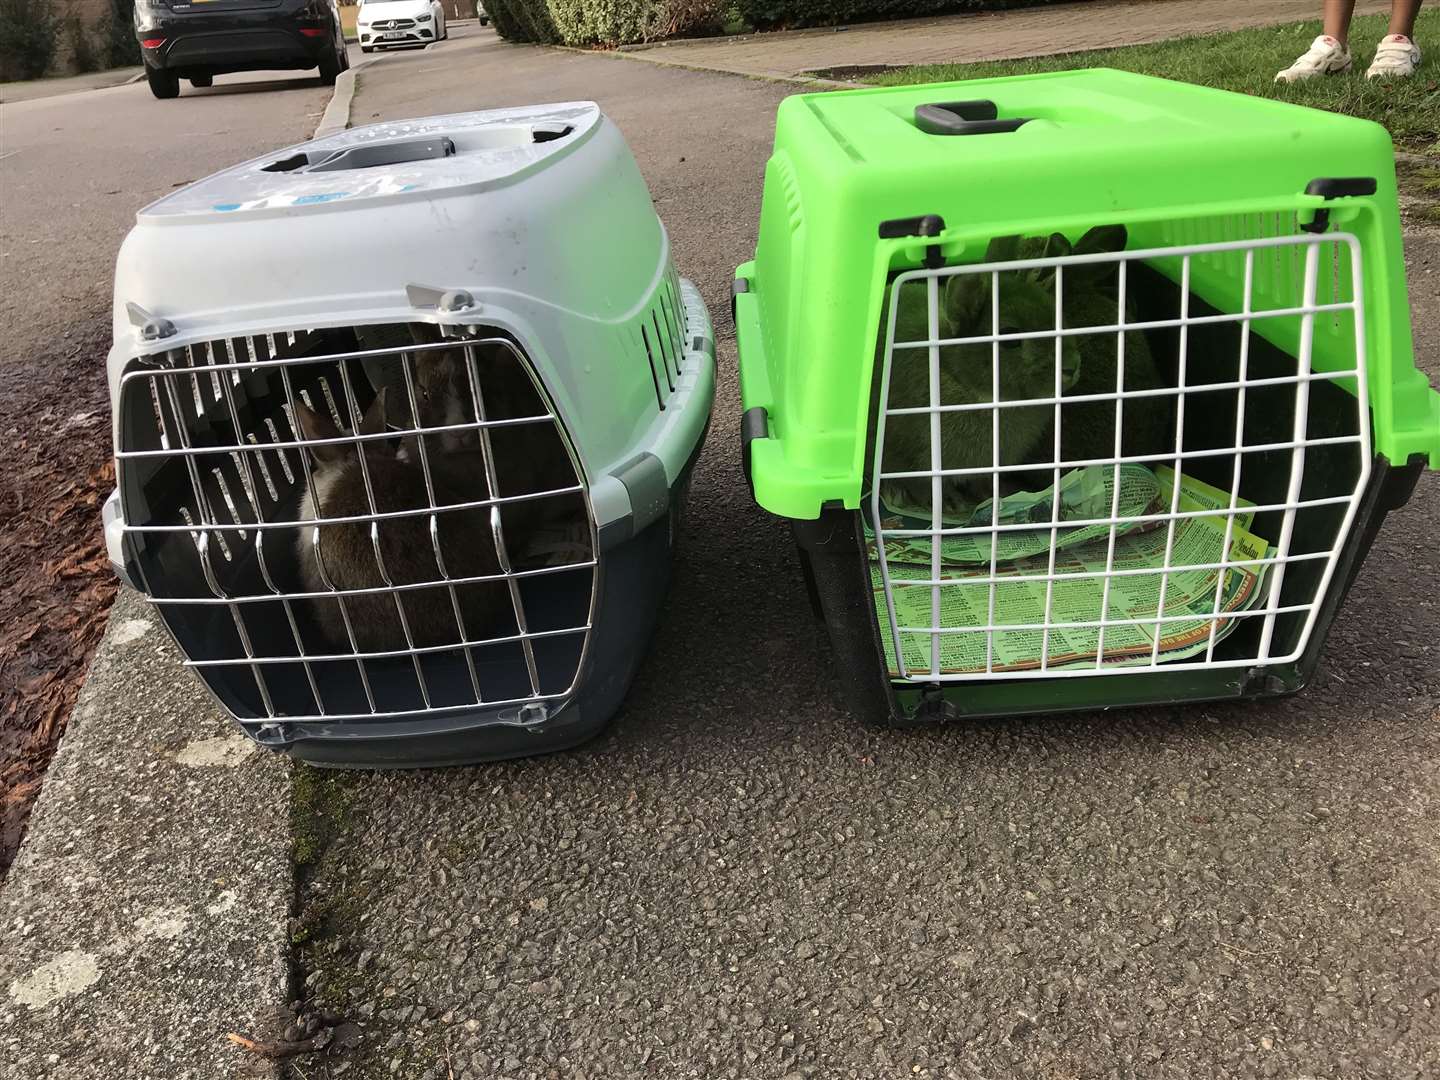 Ten rabbits were found abandoned in pet carriers. Picture: RSPCA